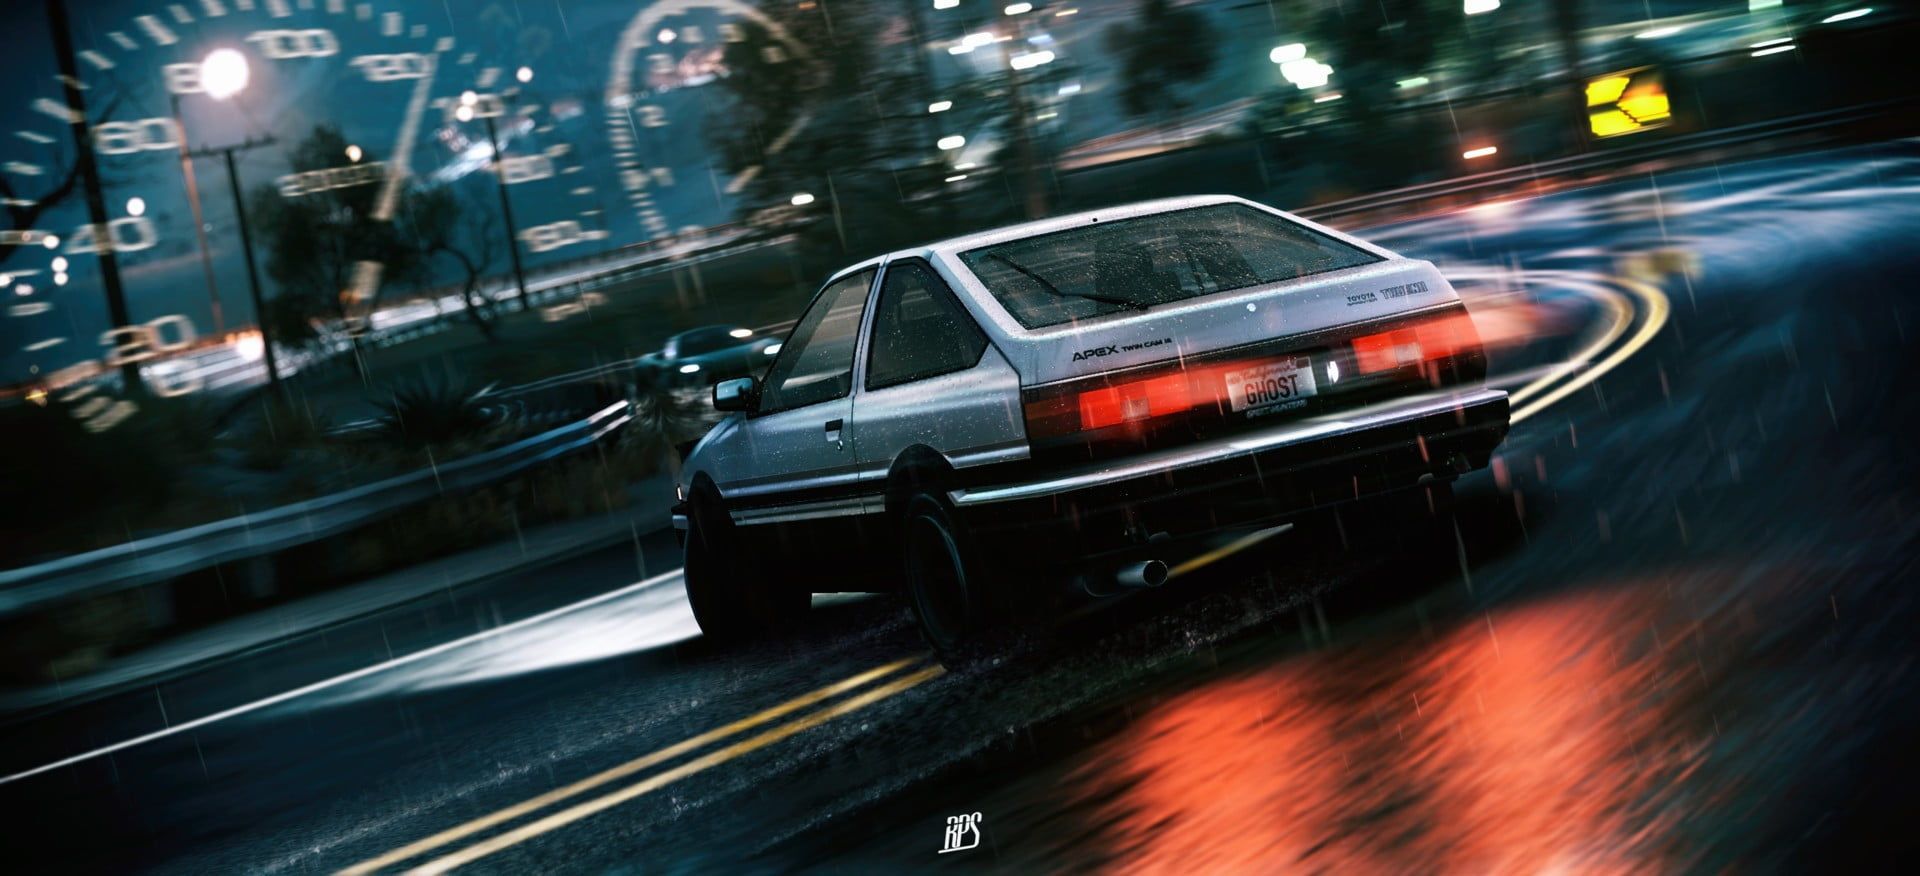 silver coupe #car Initial D #drift Toyota AE86 Toyota Sprinter